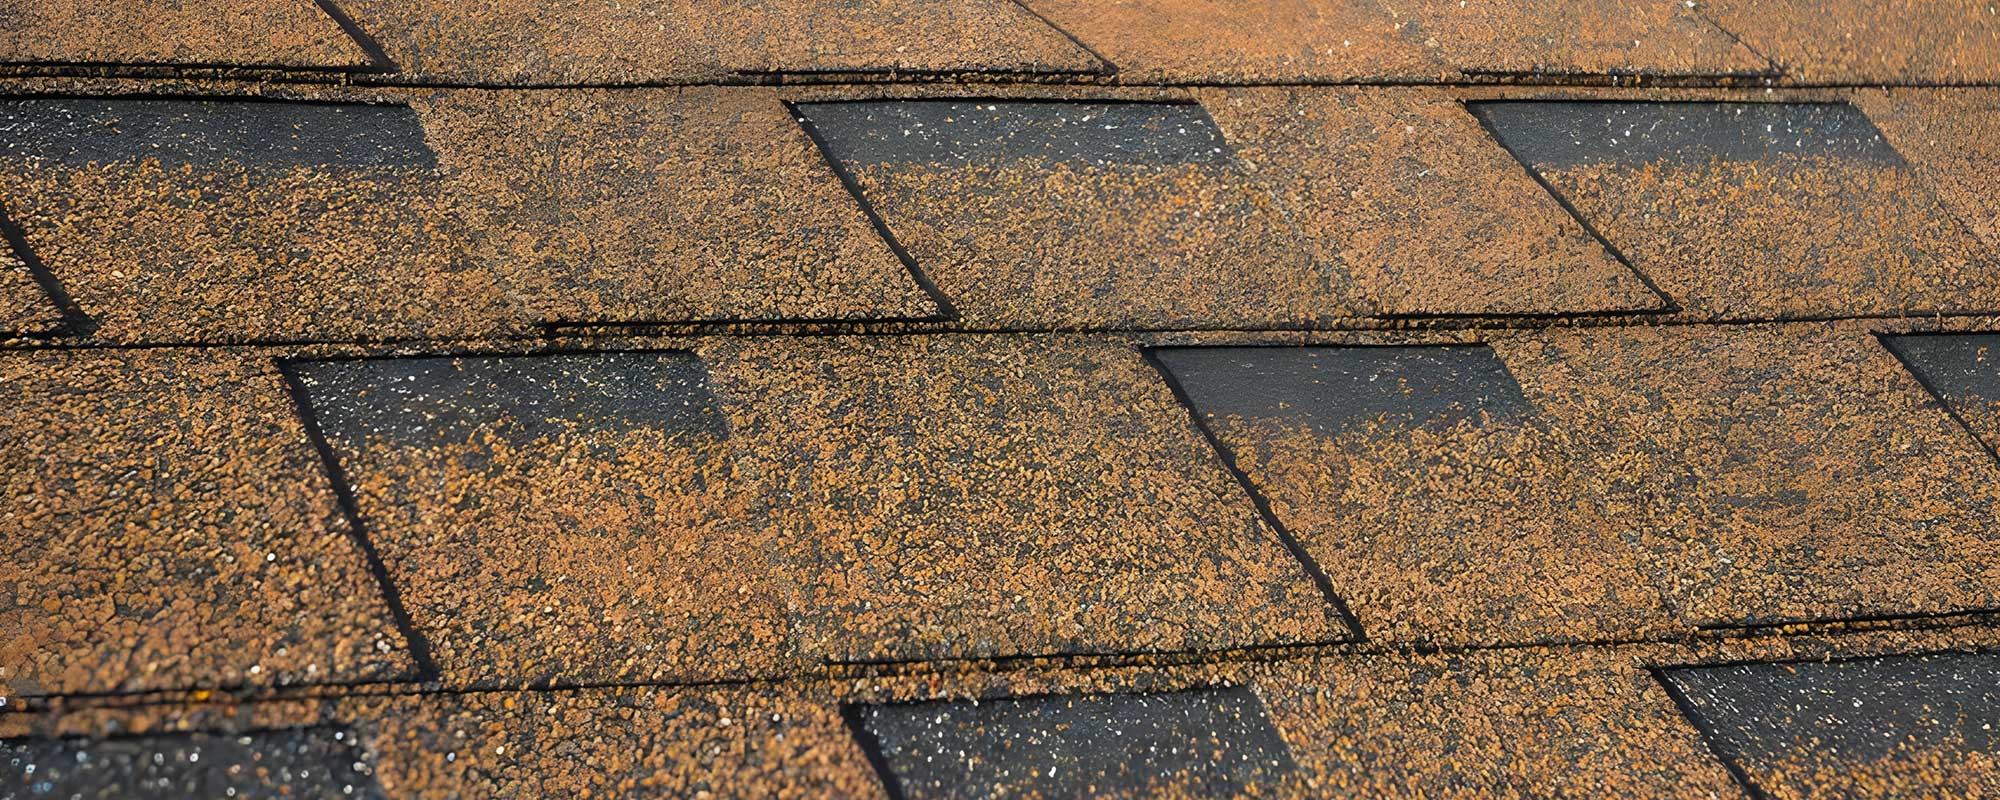 How to Choose The Longest Lasting Roof Material